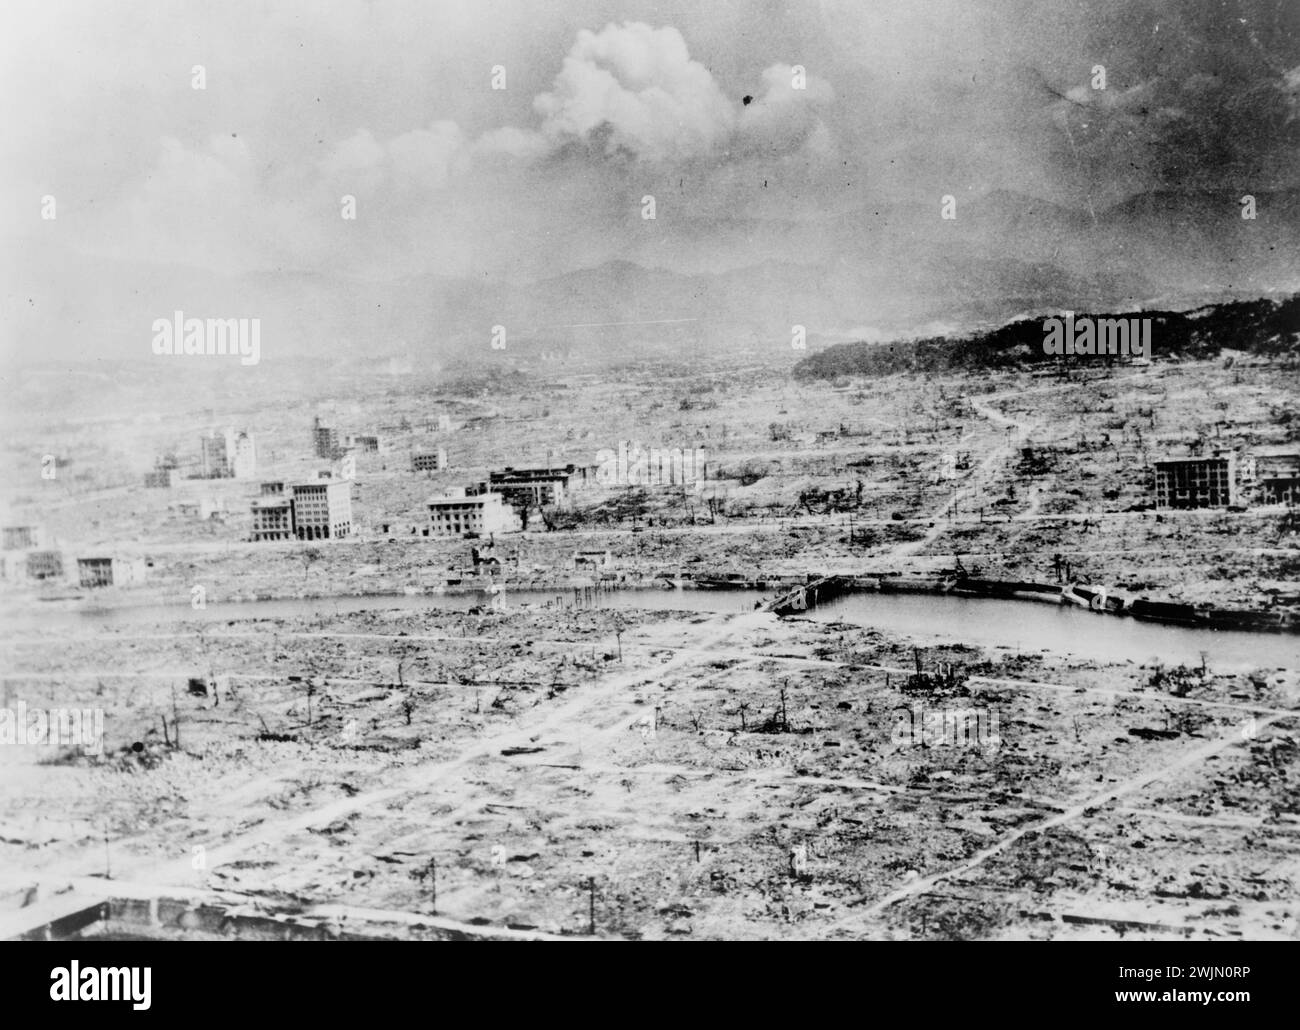 Atomic Bomb disaster, Japan - General panoramic view of Hiroshima after the bomb - US Army photo Stock Photo